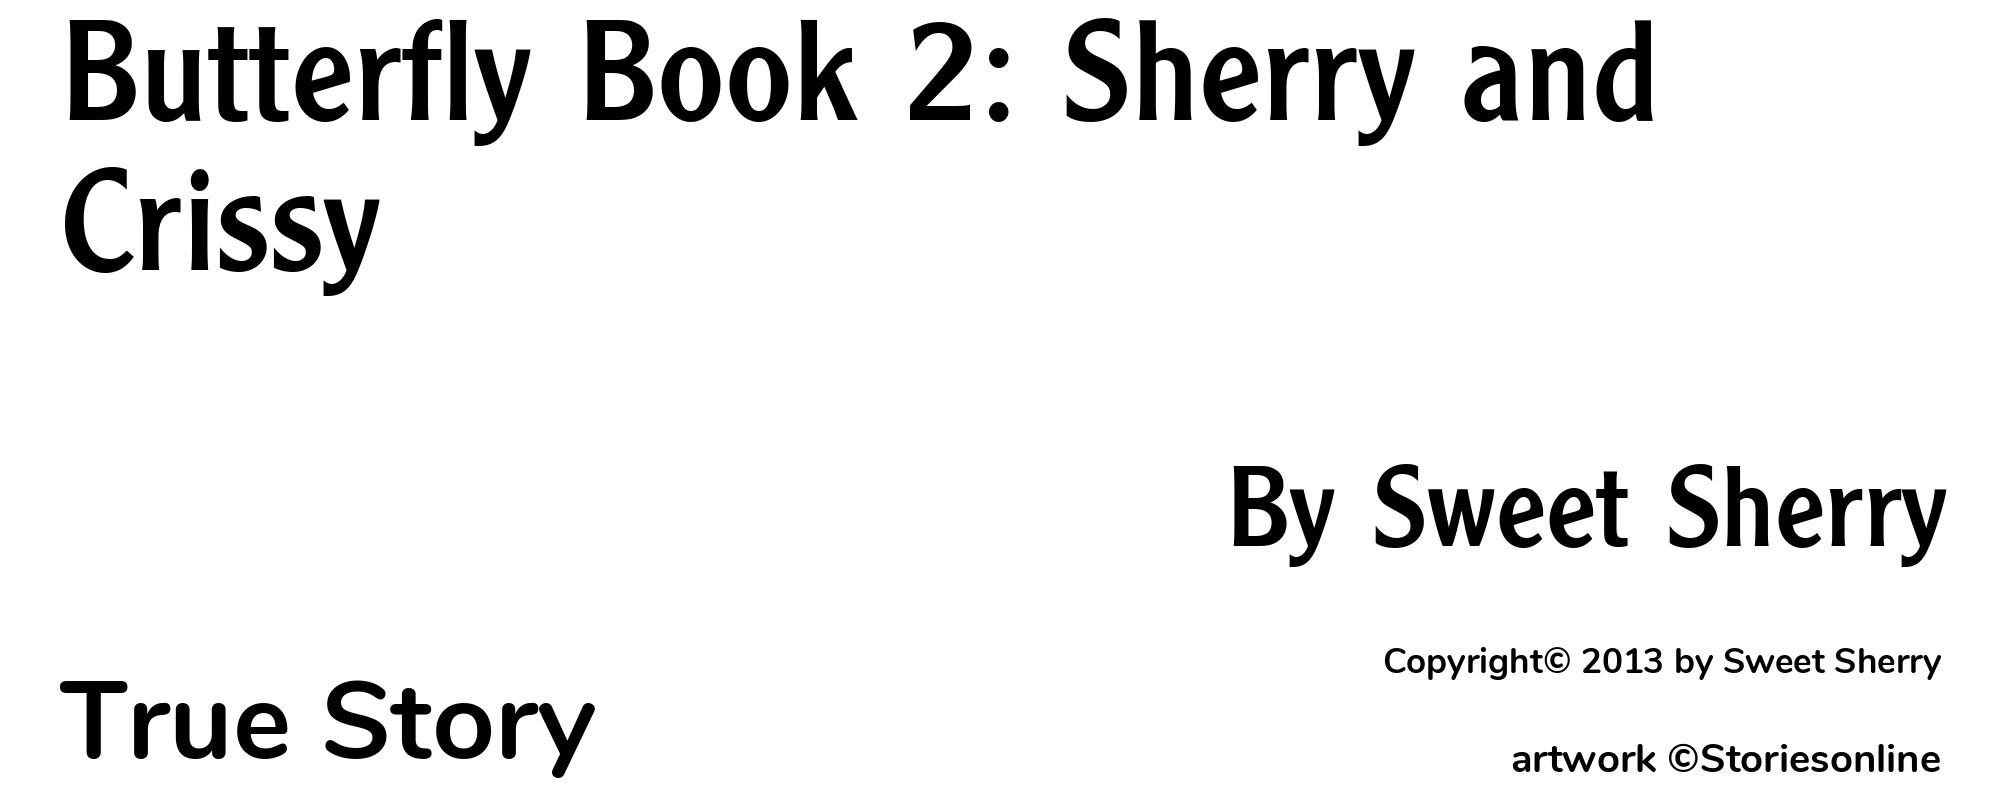 Butterfly Book 2: Sherry and Crissy - Cover